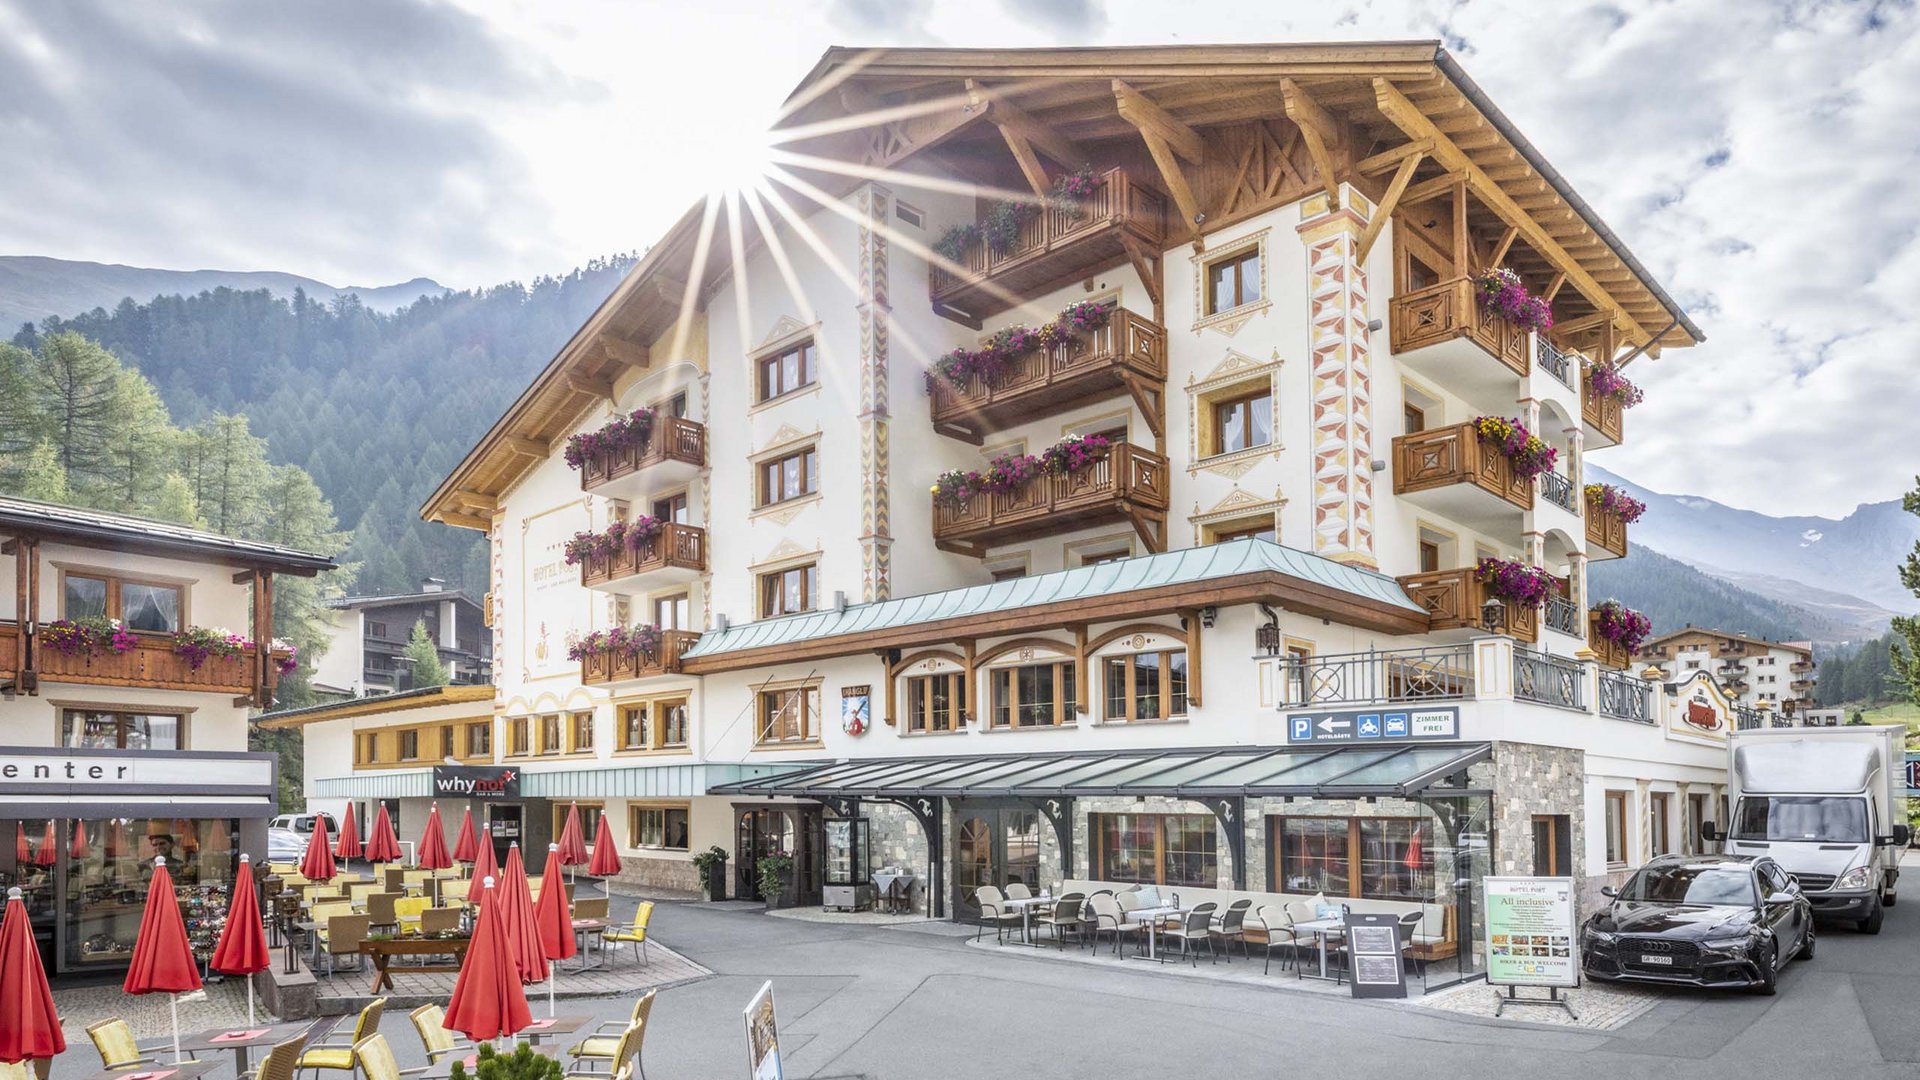 Our hotels in Switzerland: spa, shopping, cuisine & more